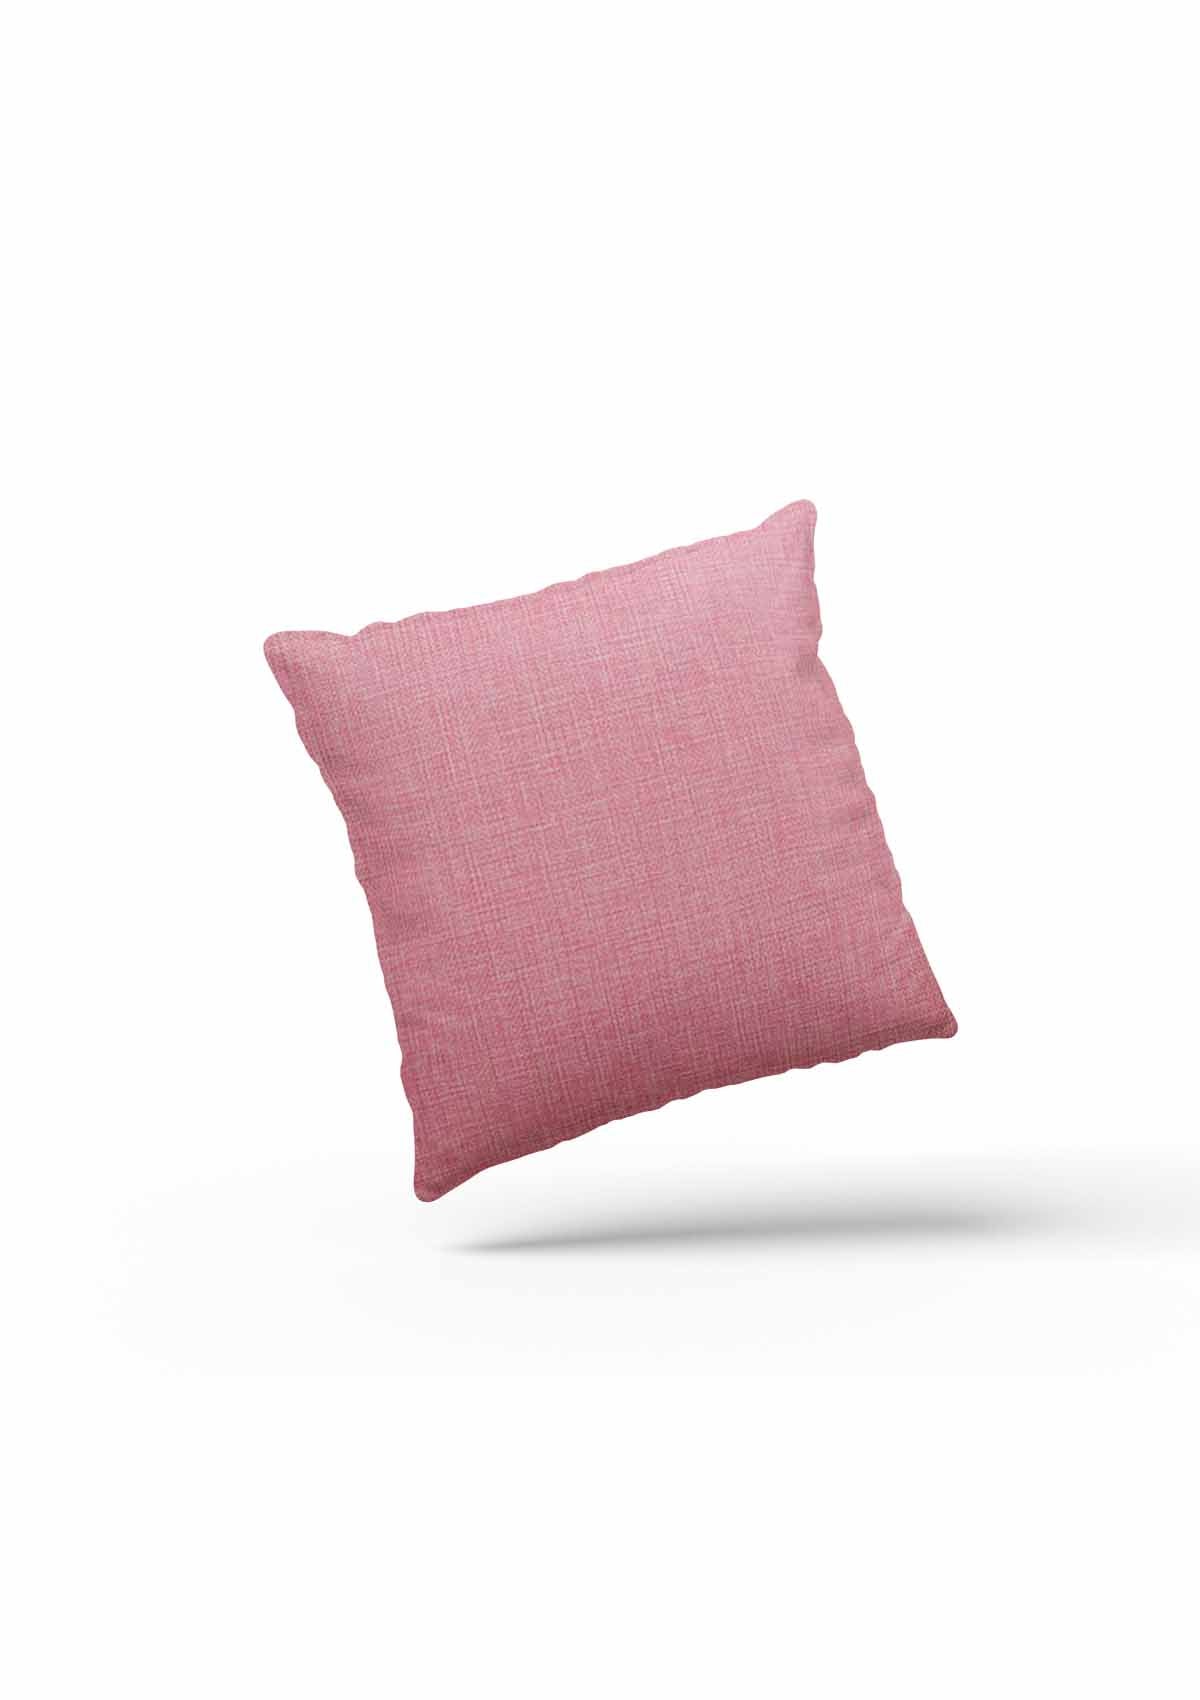 Dusty Pink Charm Linen Cushion Cover | CovermyCushion